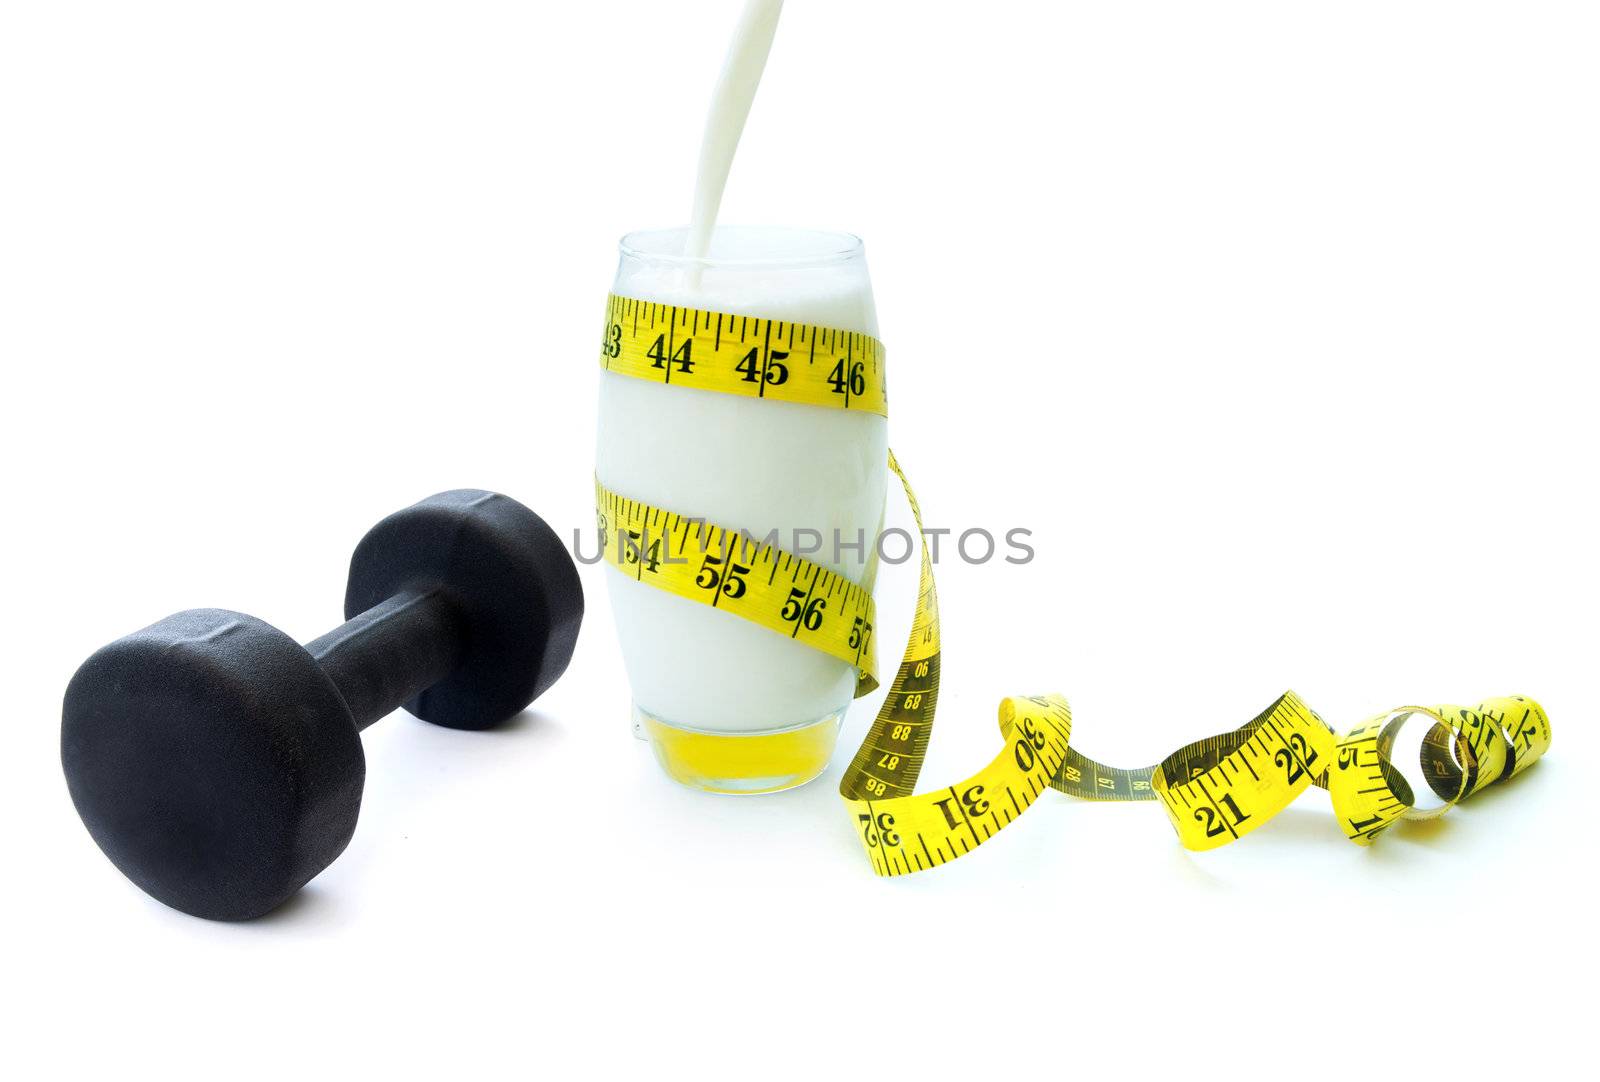 Glass of protein rich milk with an exercise dumbbell and measuring tape 